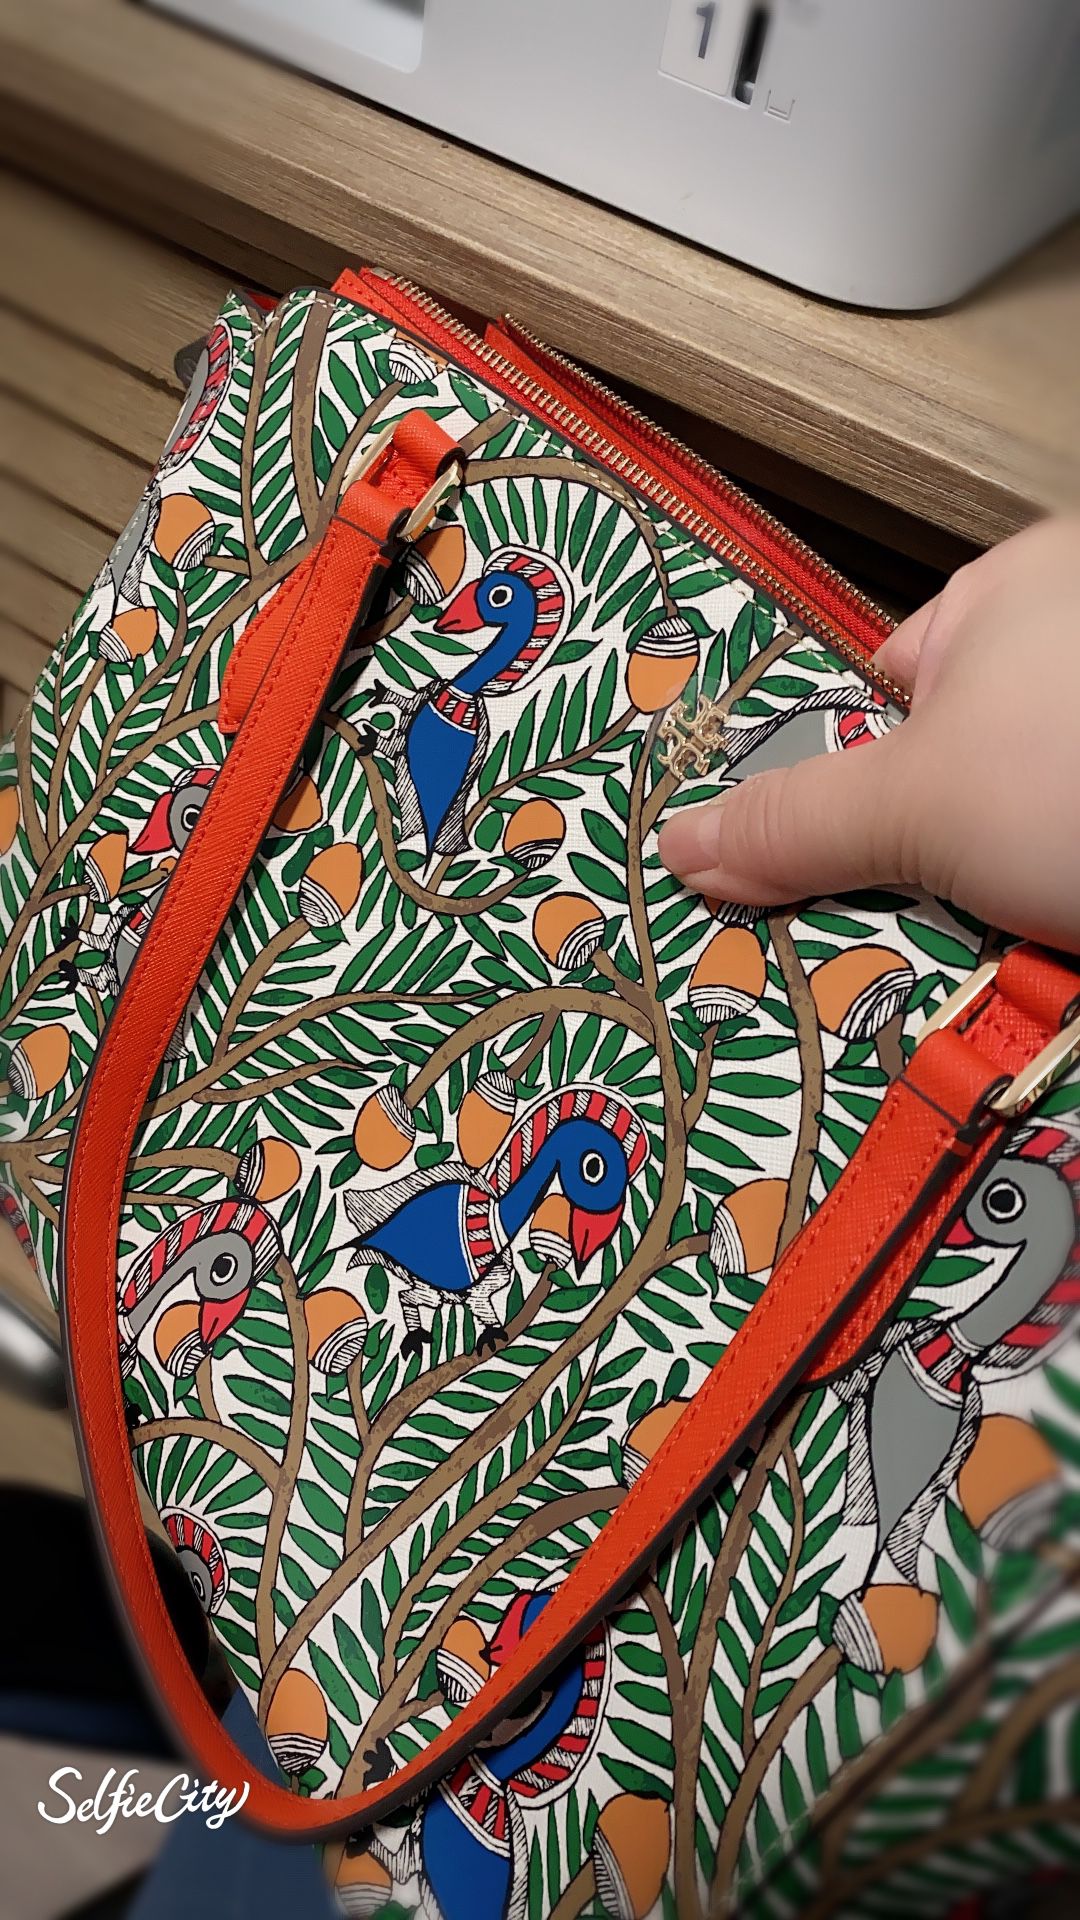 Brand New Tory Burch Tote Bags Toucan for Sale in Bellevue, WA - OfferUp